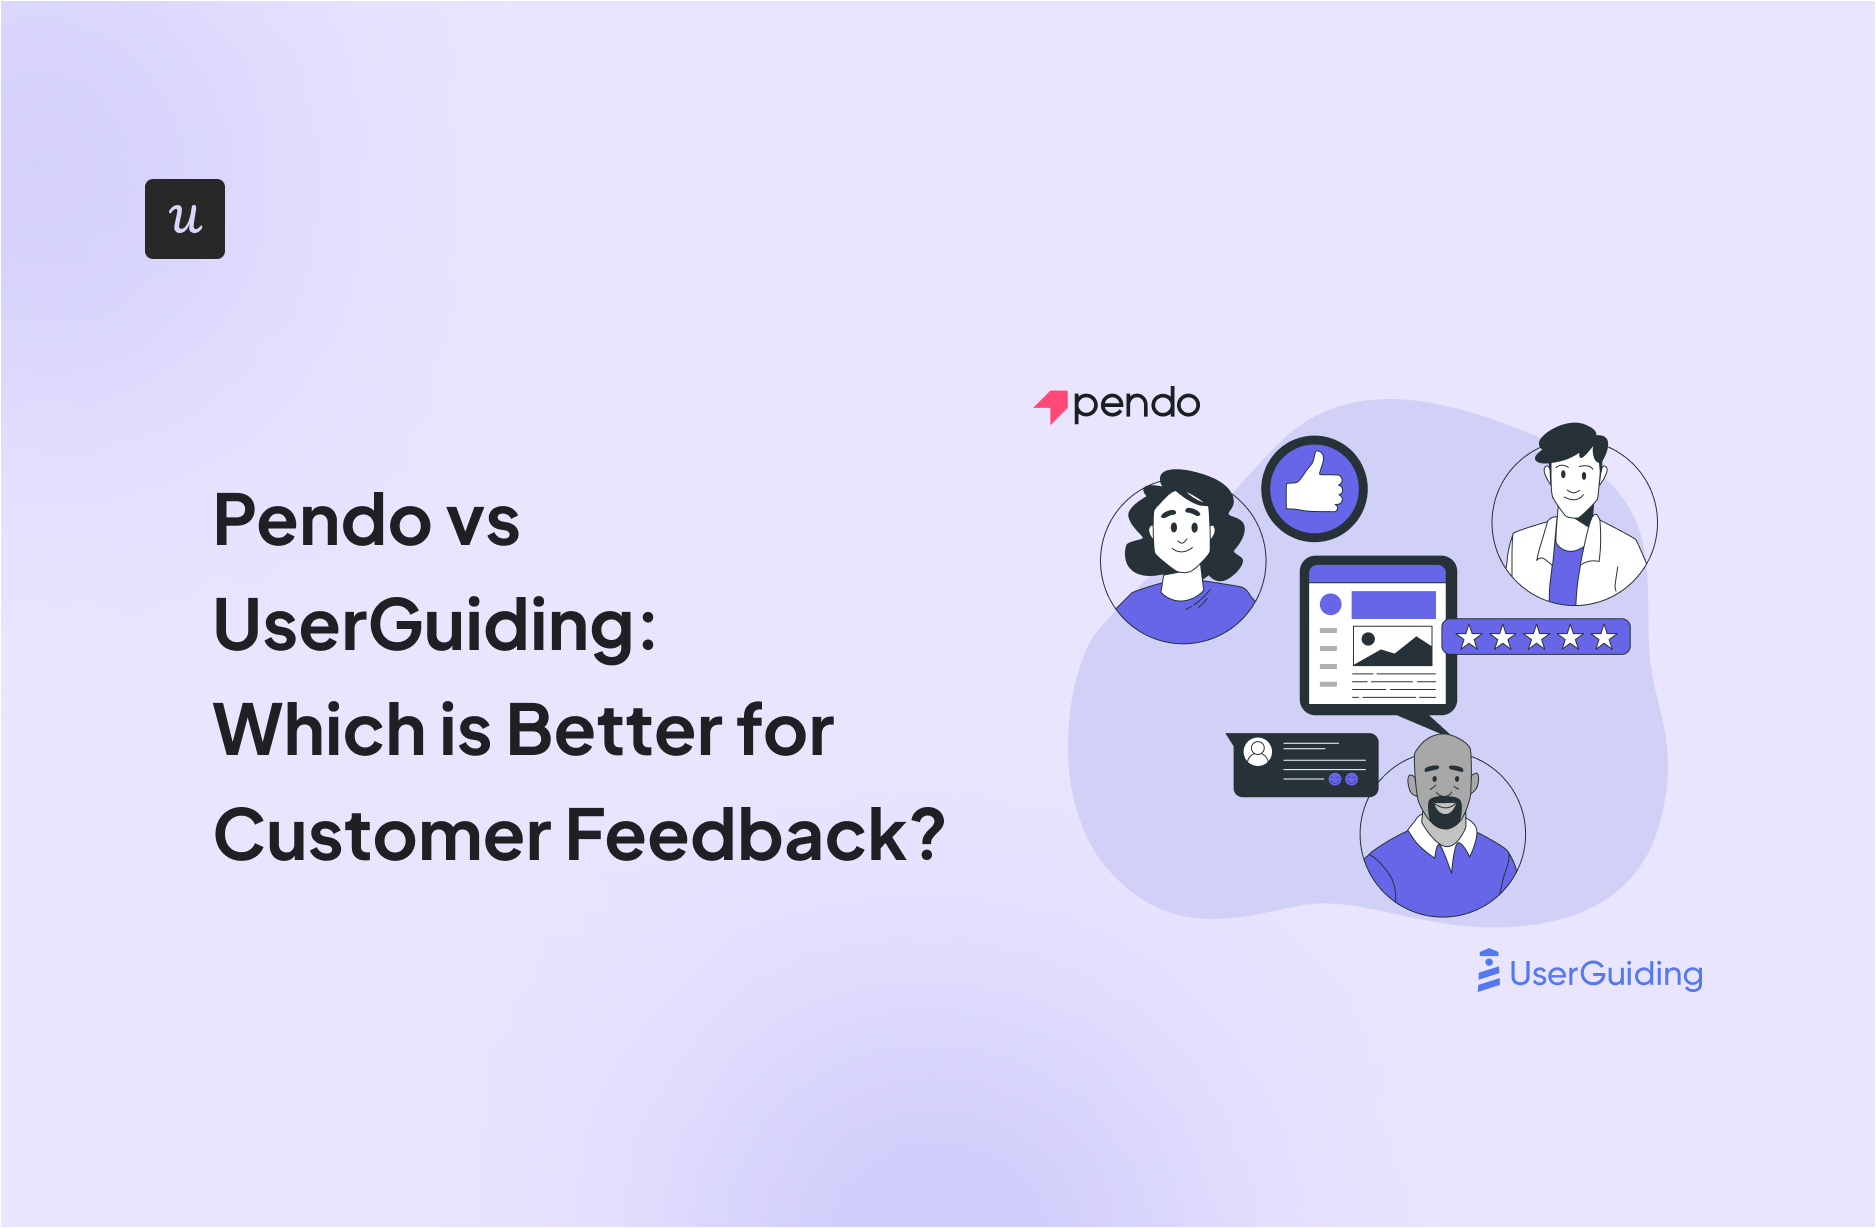 Pendo vs UserGuiding: Which is Better for Customer Feedback?